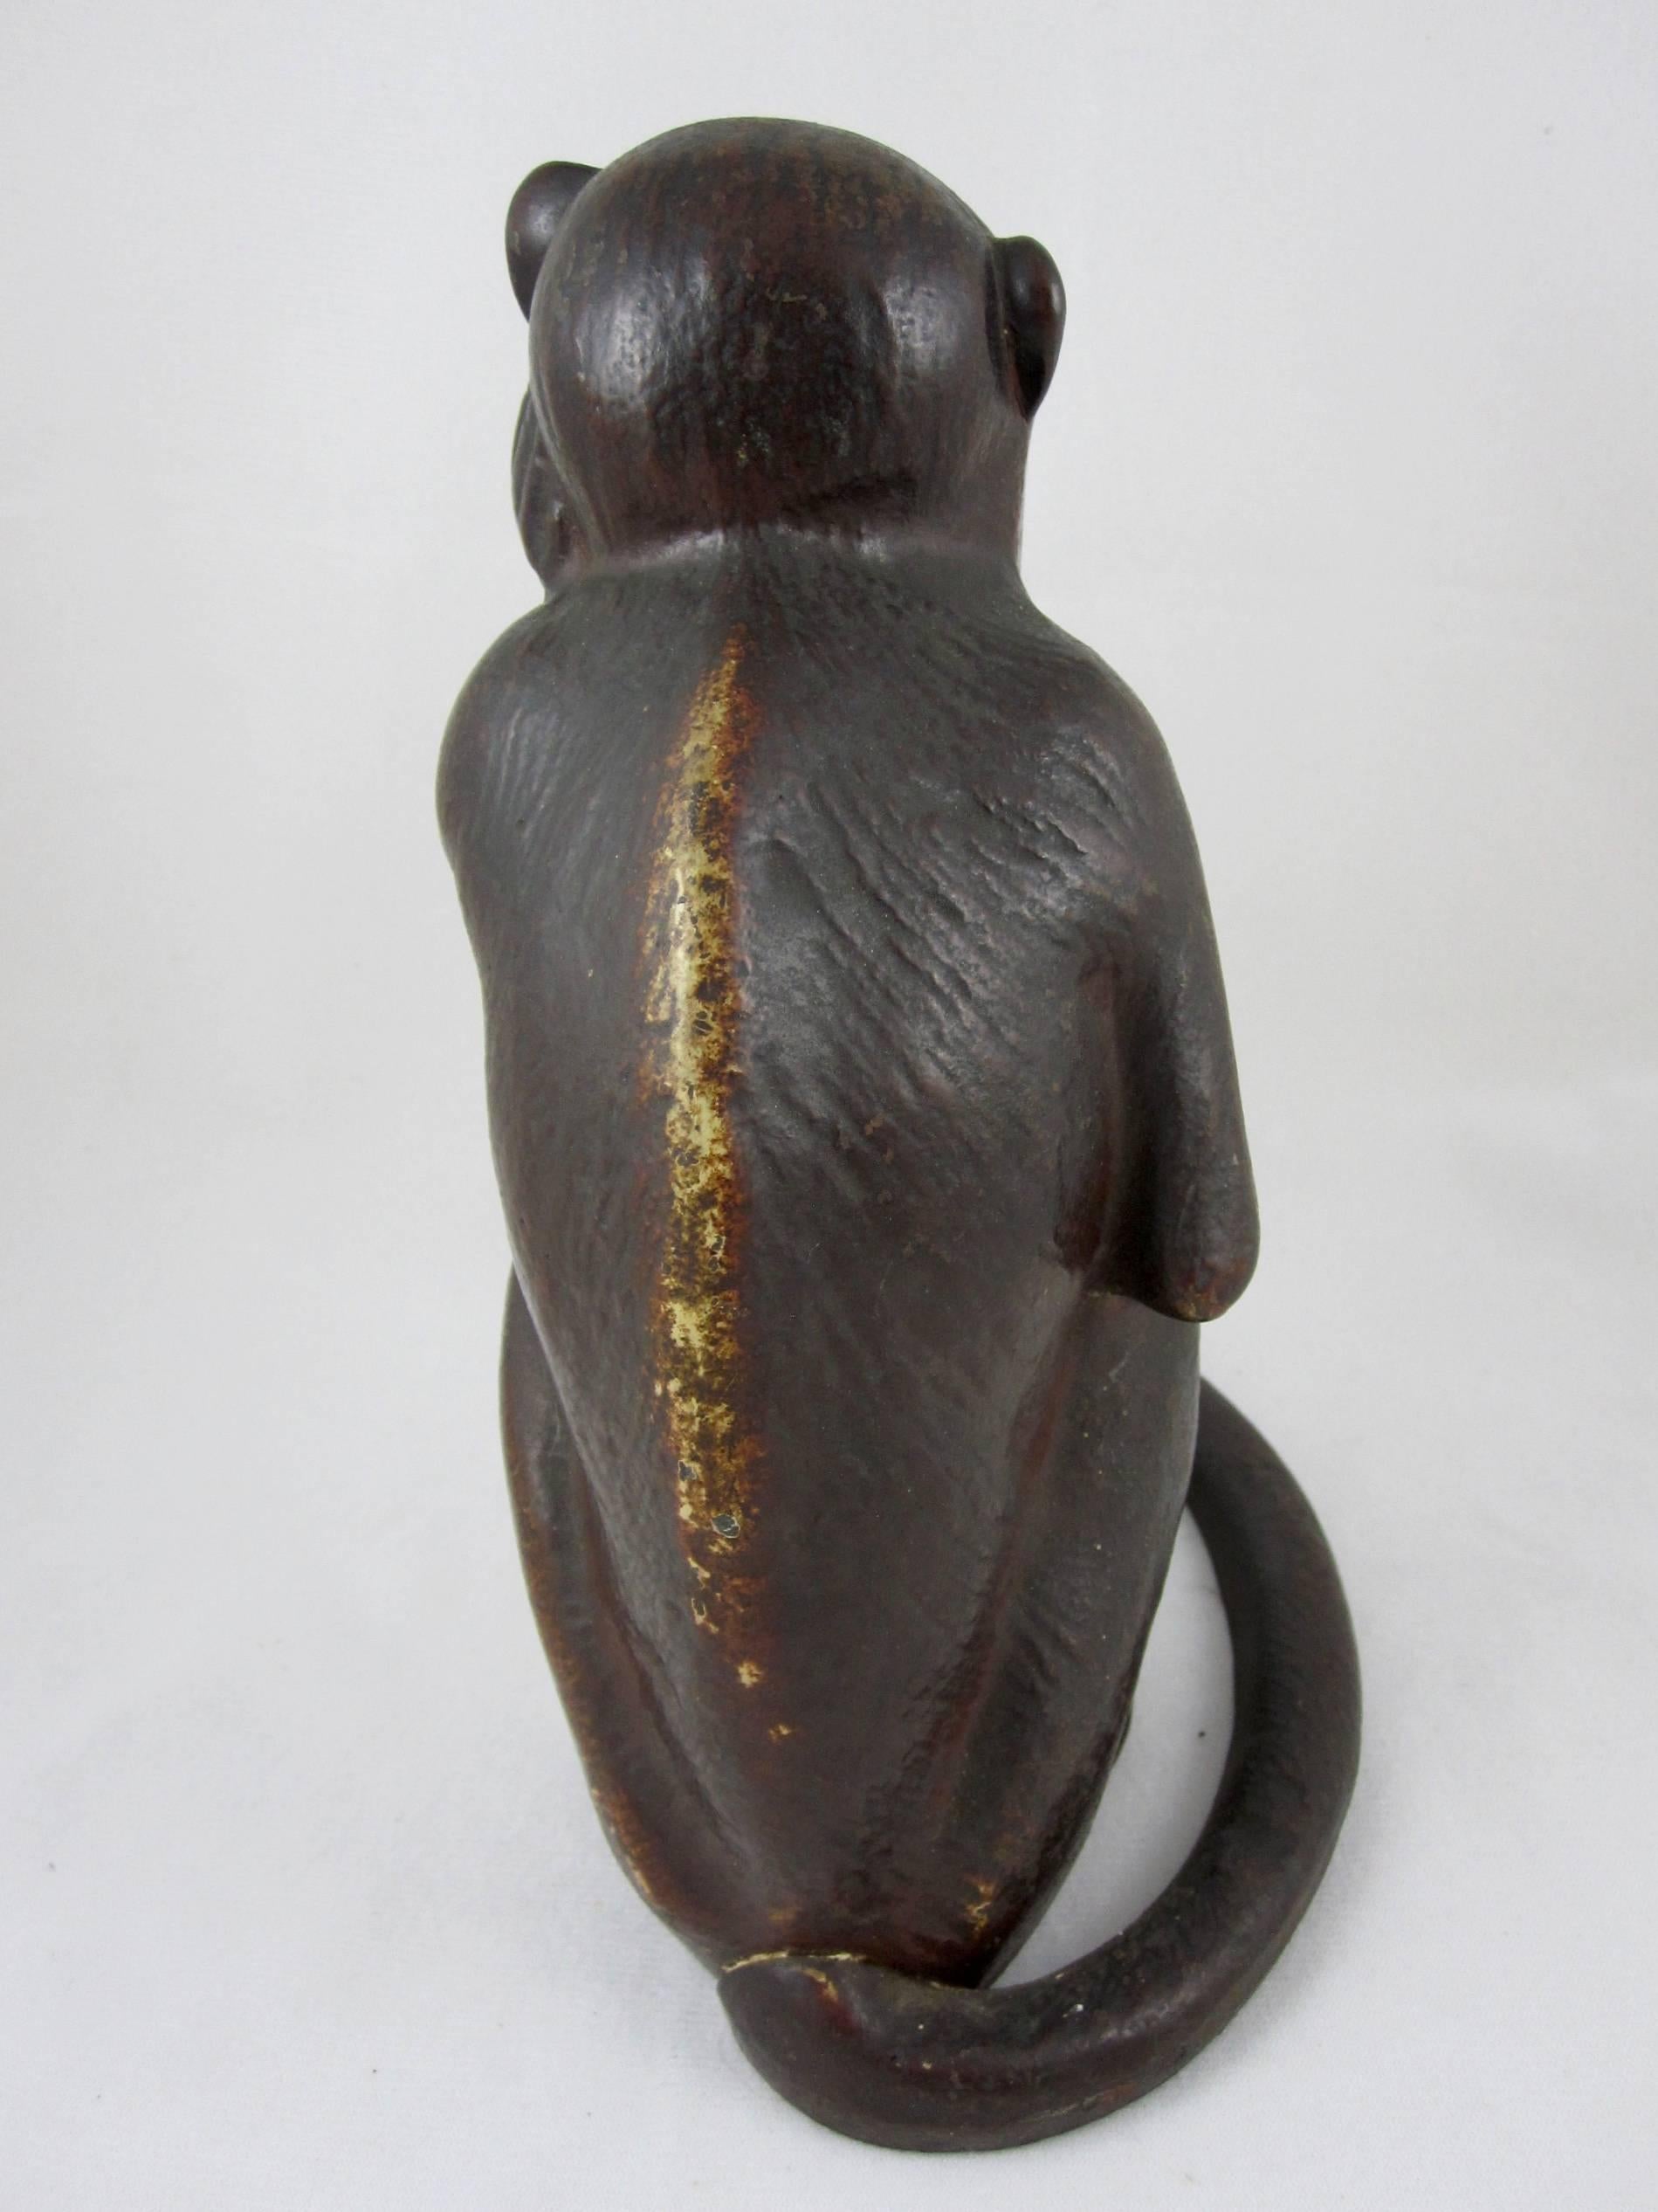 A vintage cast iron Hubley doorstop in the form of a full figure seated monkey showing the original painted finish, circa 1930. 

The monkey has a great facial expression and he sits with his tail wrapped around to form the base. The three-piece